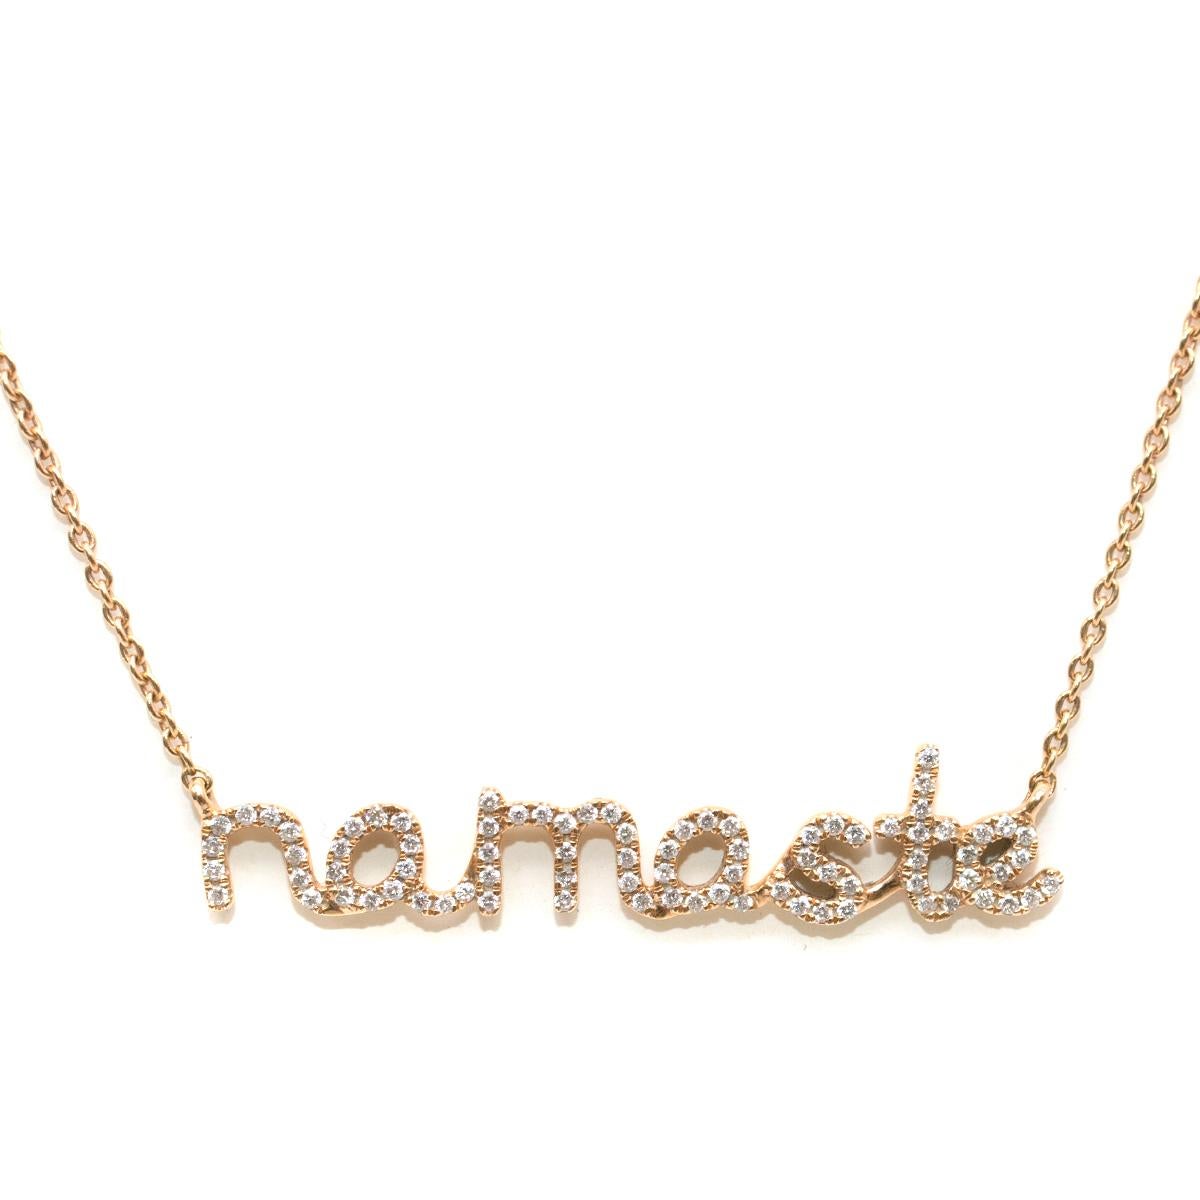 Pia Hallstrom Rose Gold Namaste Necklace

- 18k Rose gold necklace with white diamonds
- Brand new with box
- 'Namaste' encrusted with 0.23ct high quality diamonds
- Fine chain
- Lobster clasp closure
- End of line stock

Please note, these items